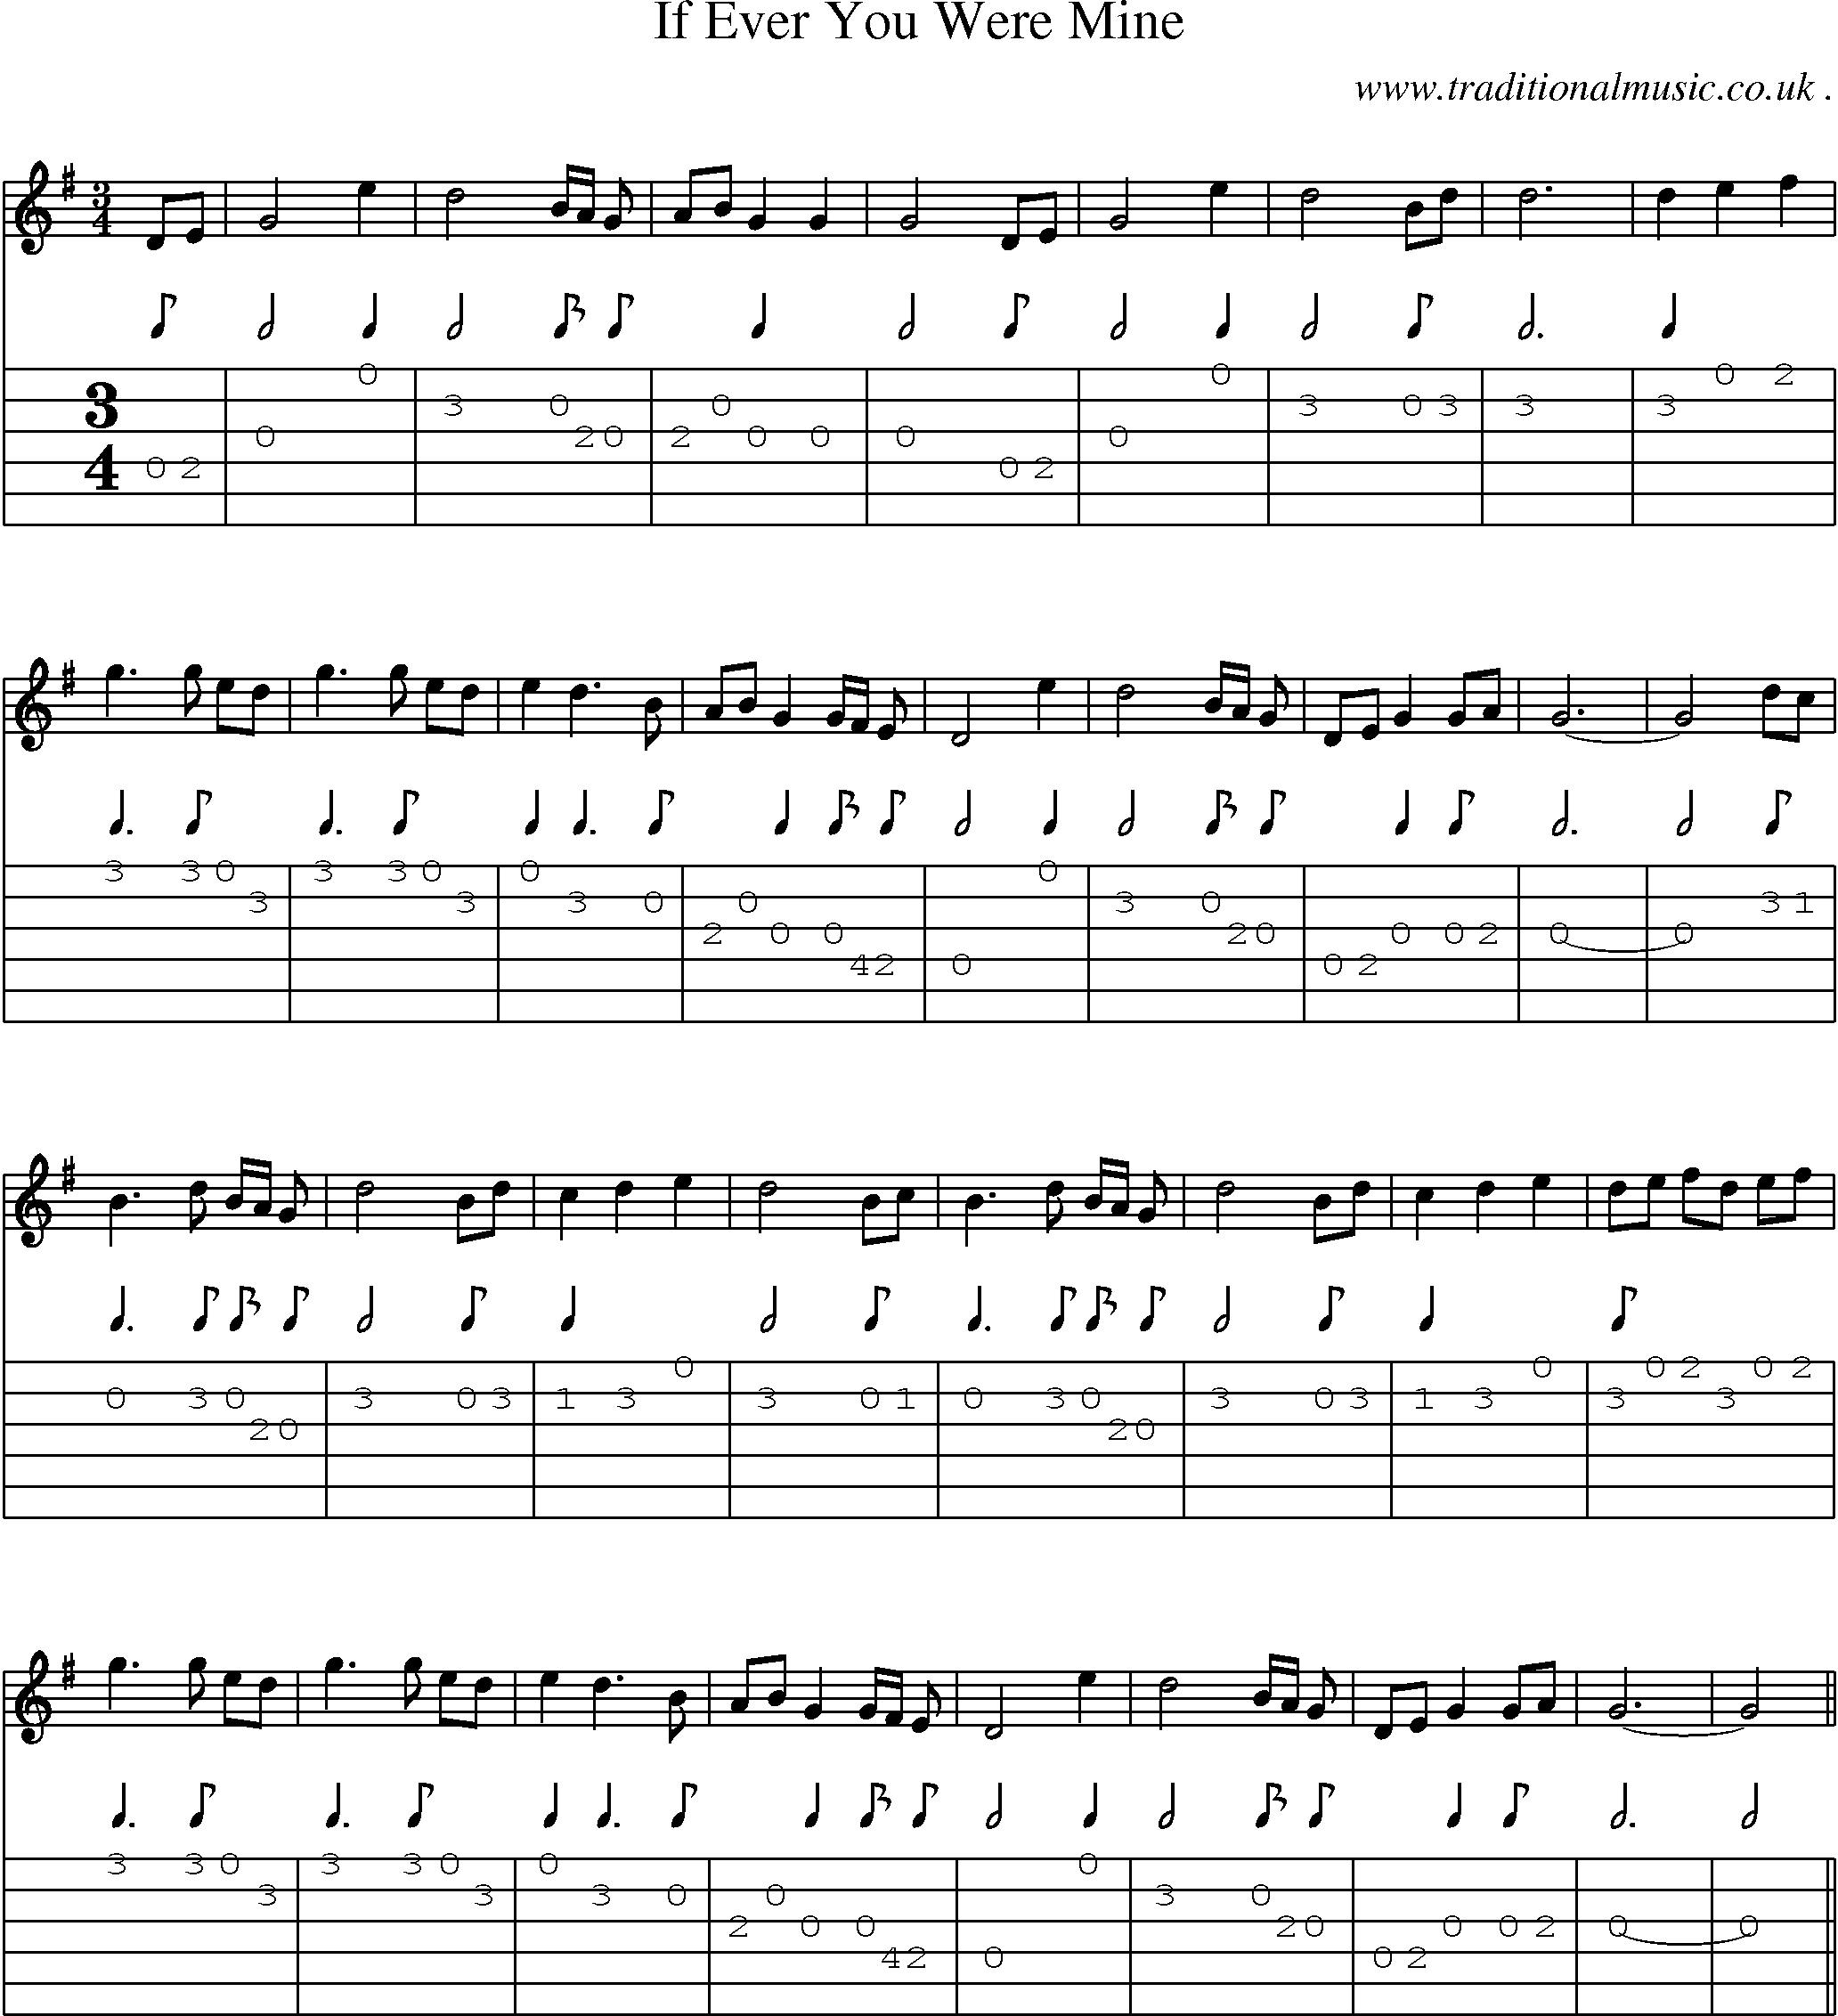 Sheet-music  score, Chords and Guitar Tabs for If Ever You Were Mine